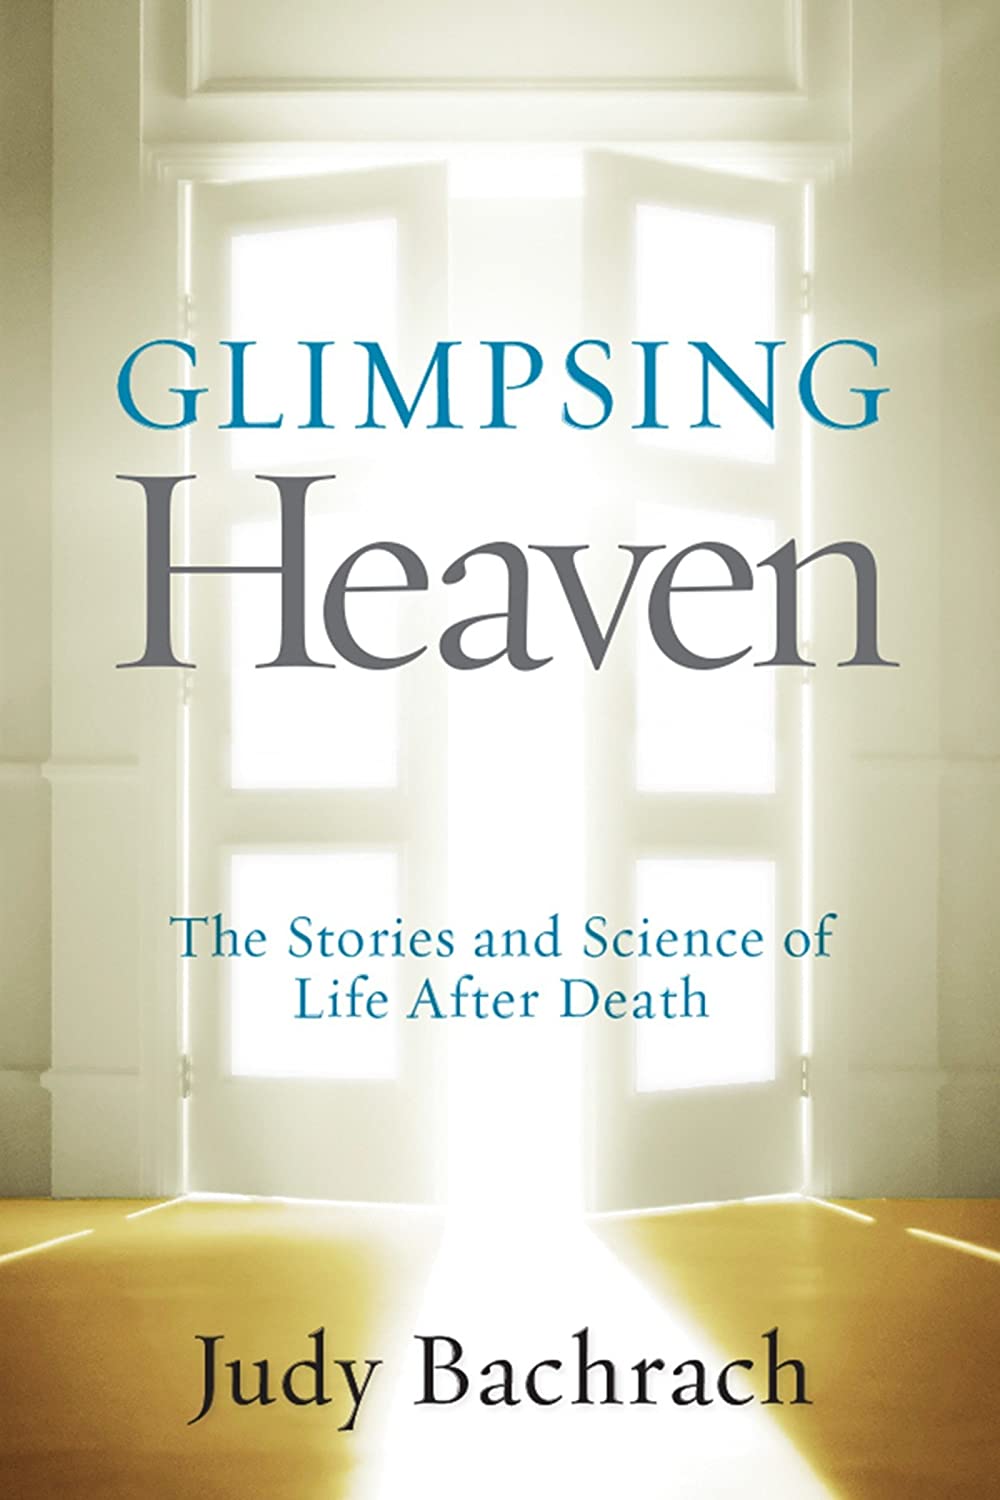 Glimpsing Heaven: The Stories and Science of Life After Death